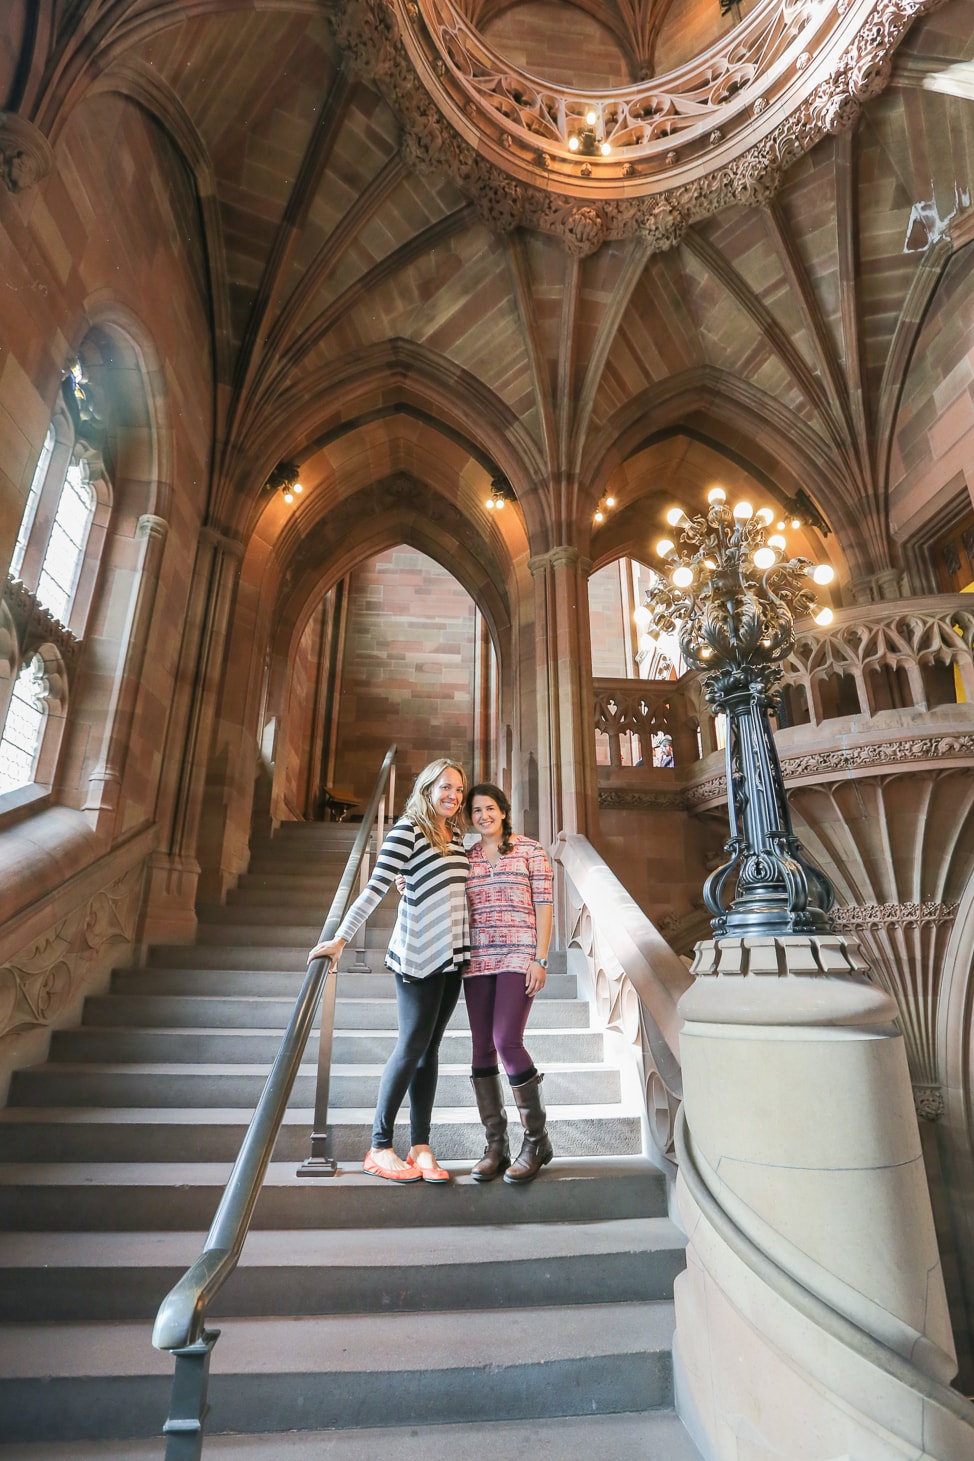 John Rylands Library in Manchester, England | Built in the 1890s, the John Rylands Library is widely regarded as one of the most beautiful libraries in the world; both the building and its collections are of outstanding international significance.